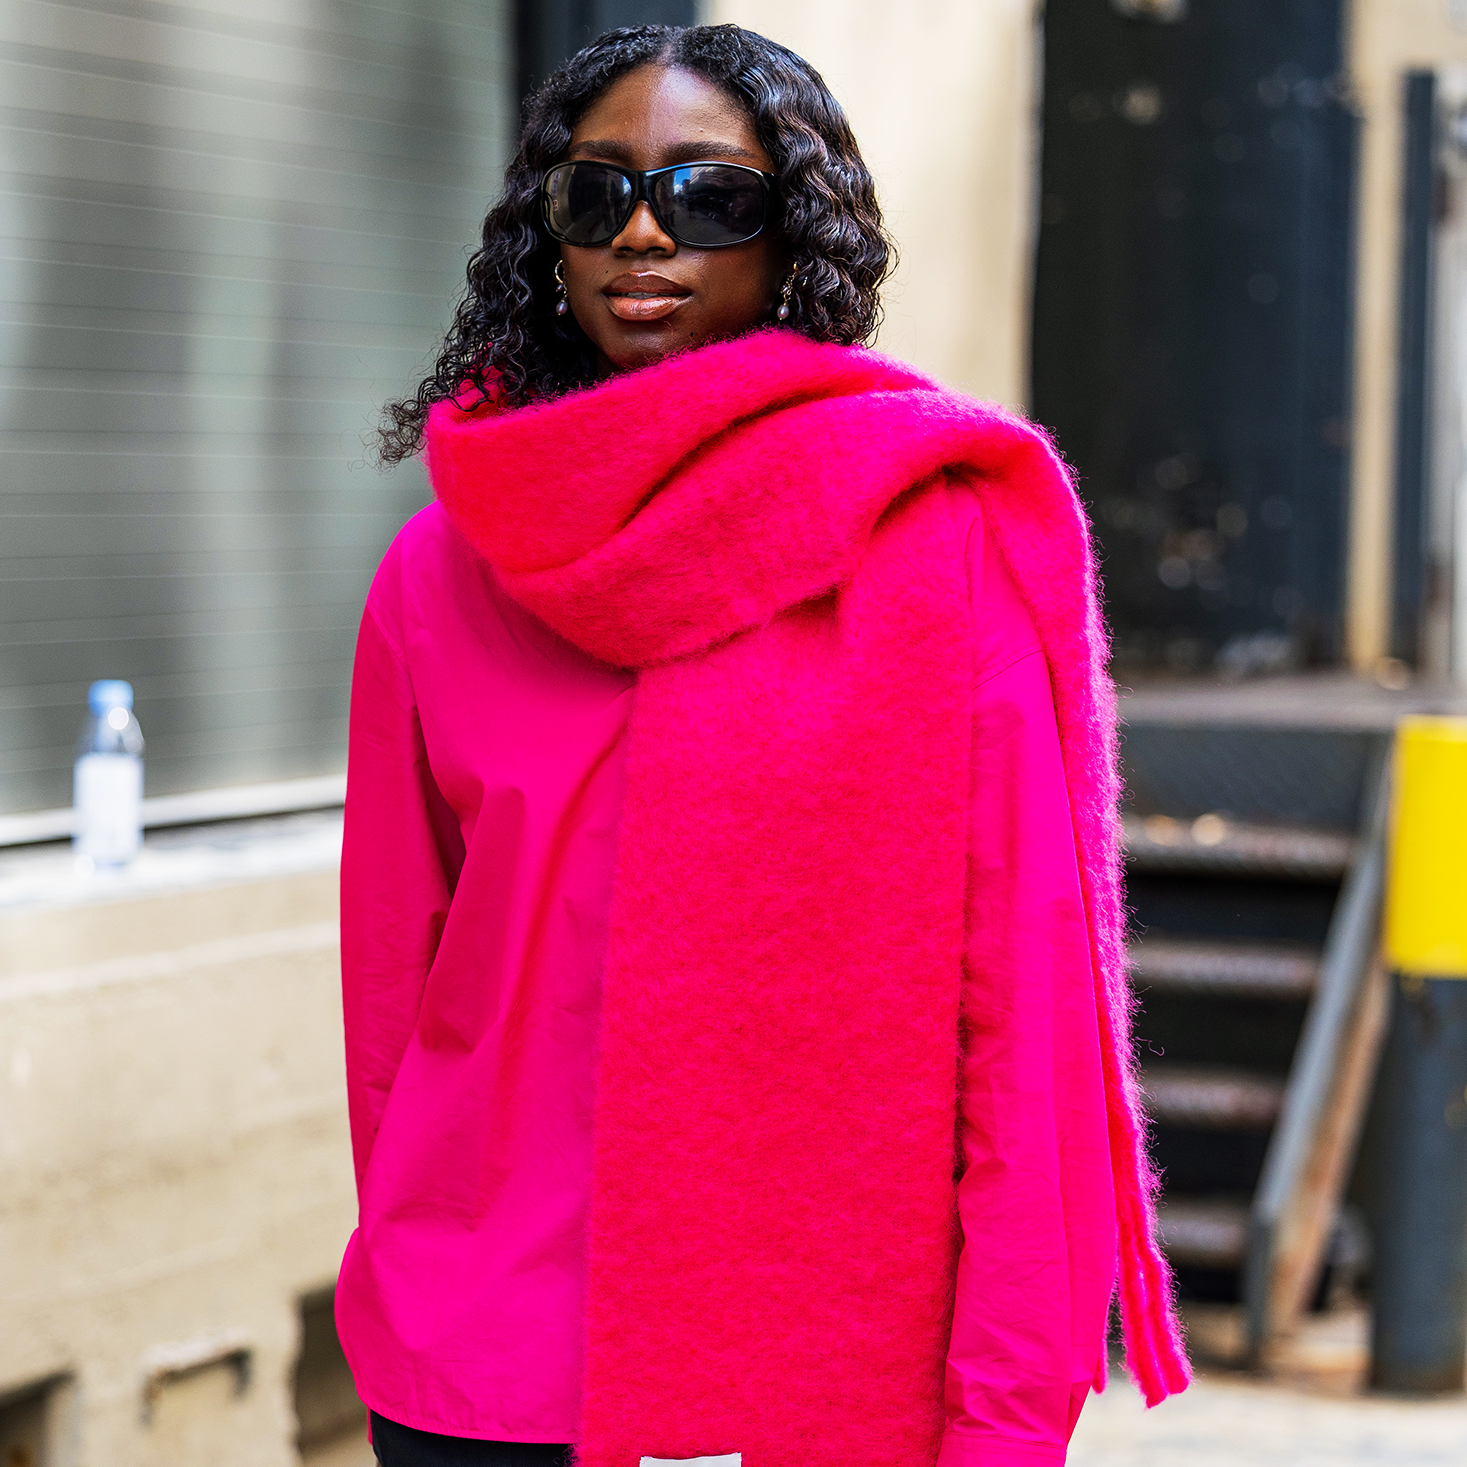 30 Cute Winter Outfits That’ll Make You WANT to Step Out Into the Cold